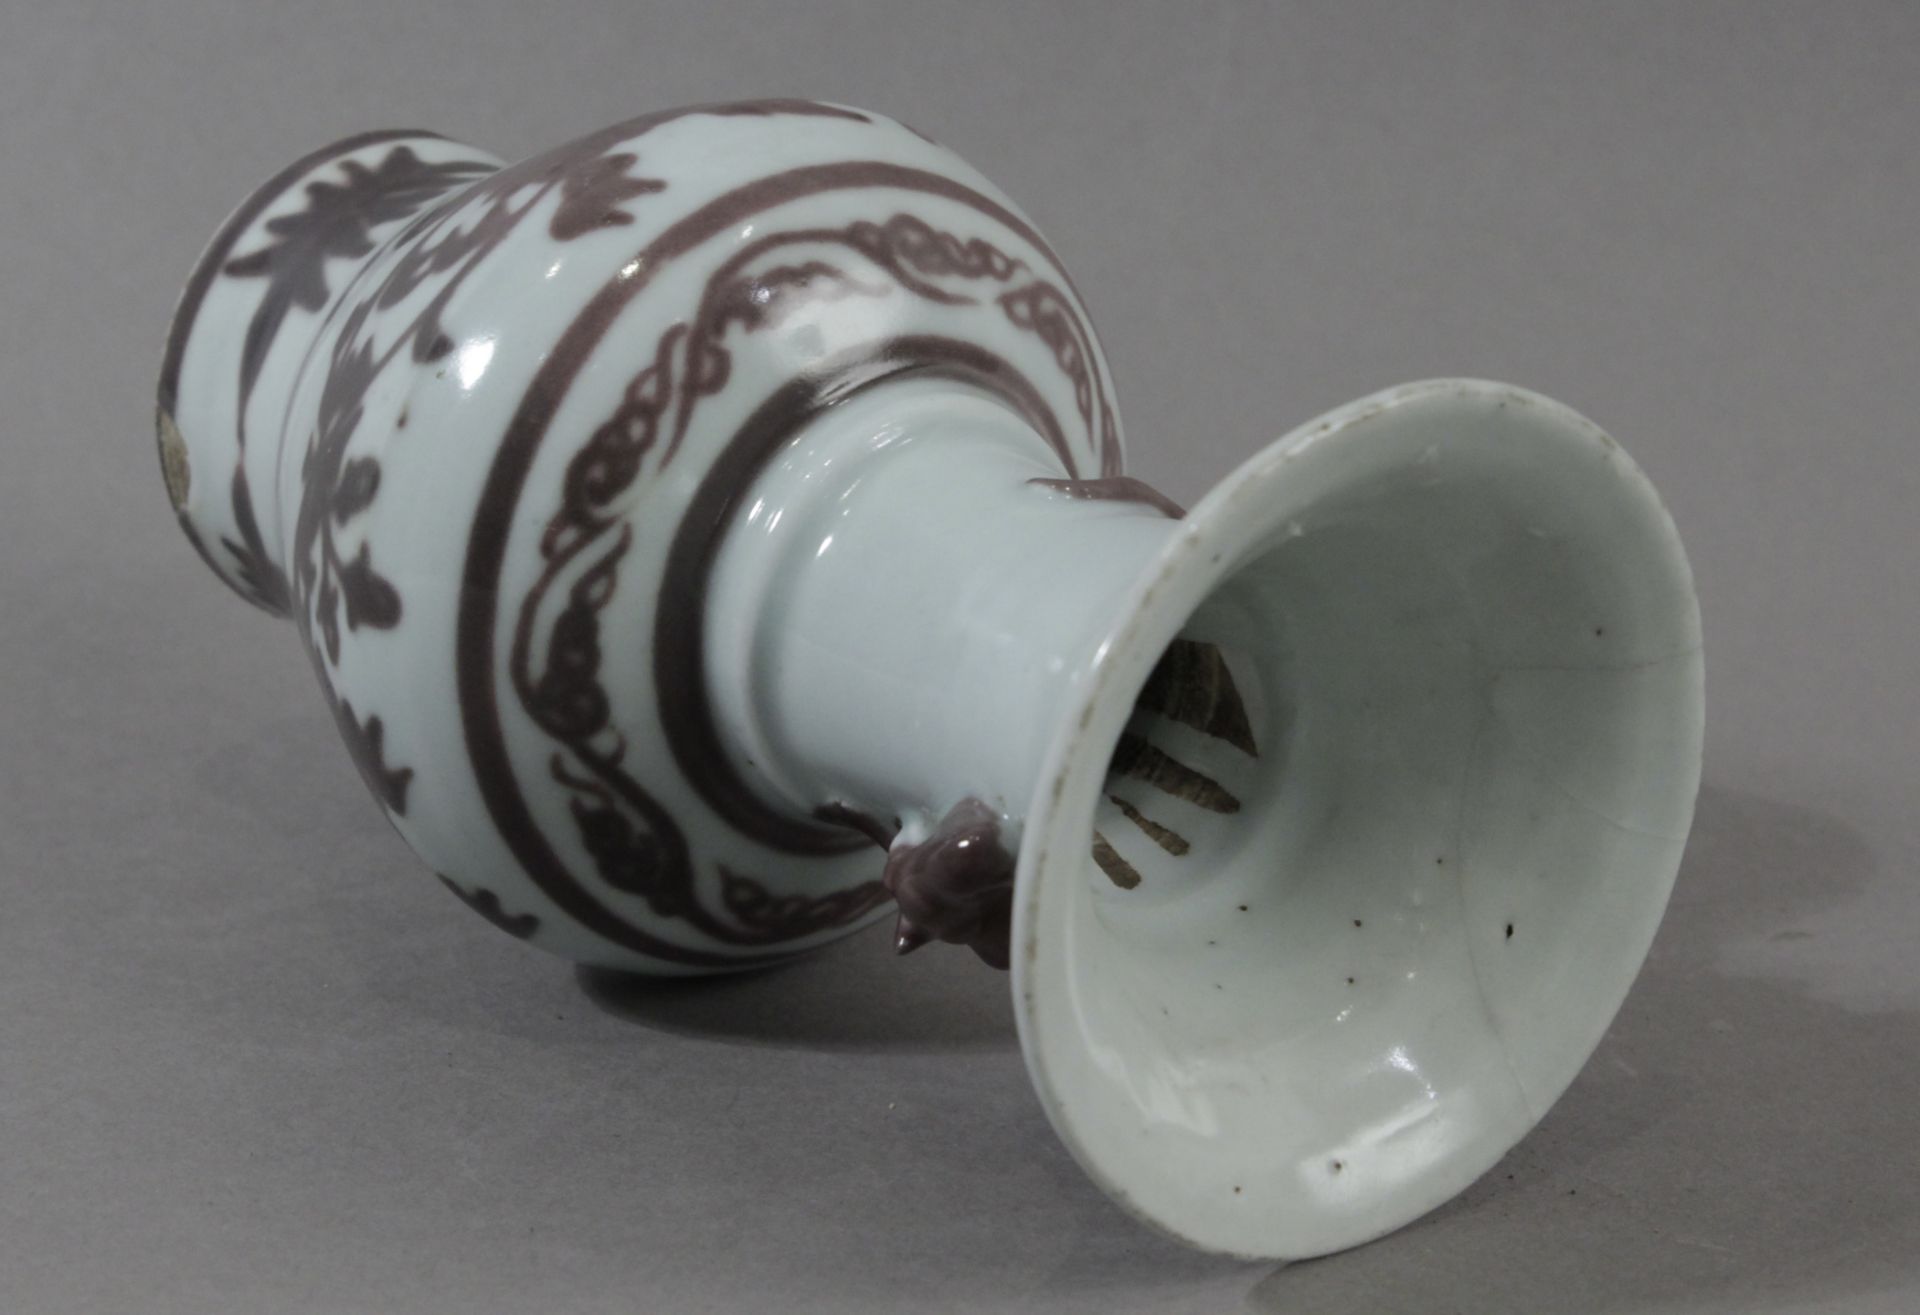 A 20th century Chinese vase from Republic period in celadon porcelain - Image 5 of 7